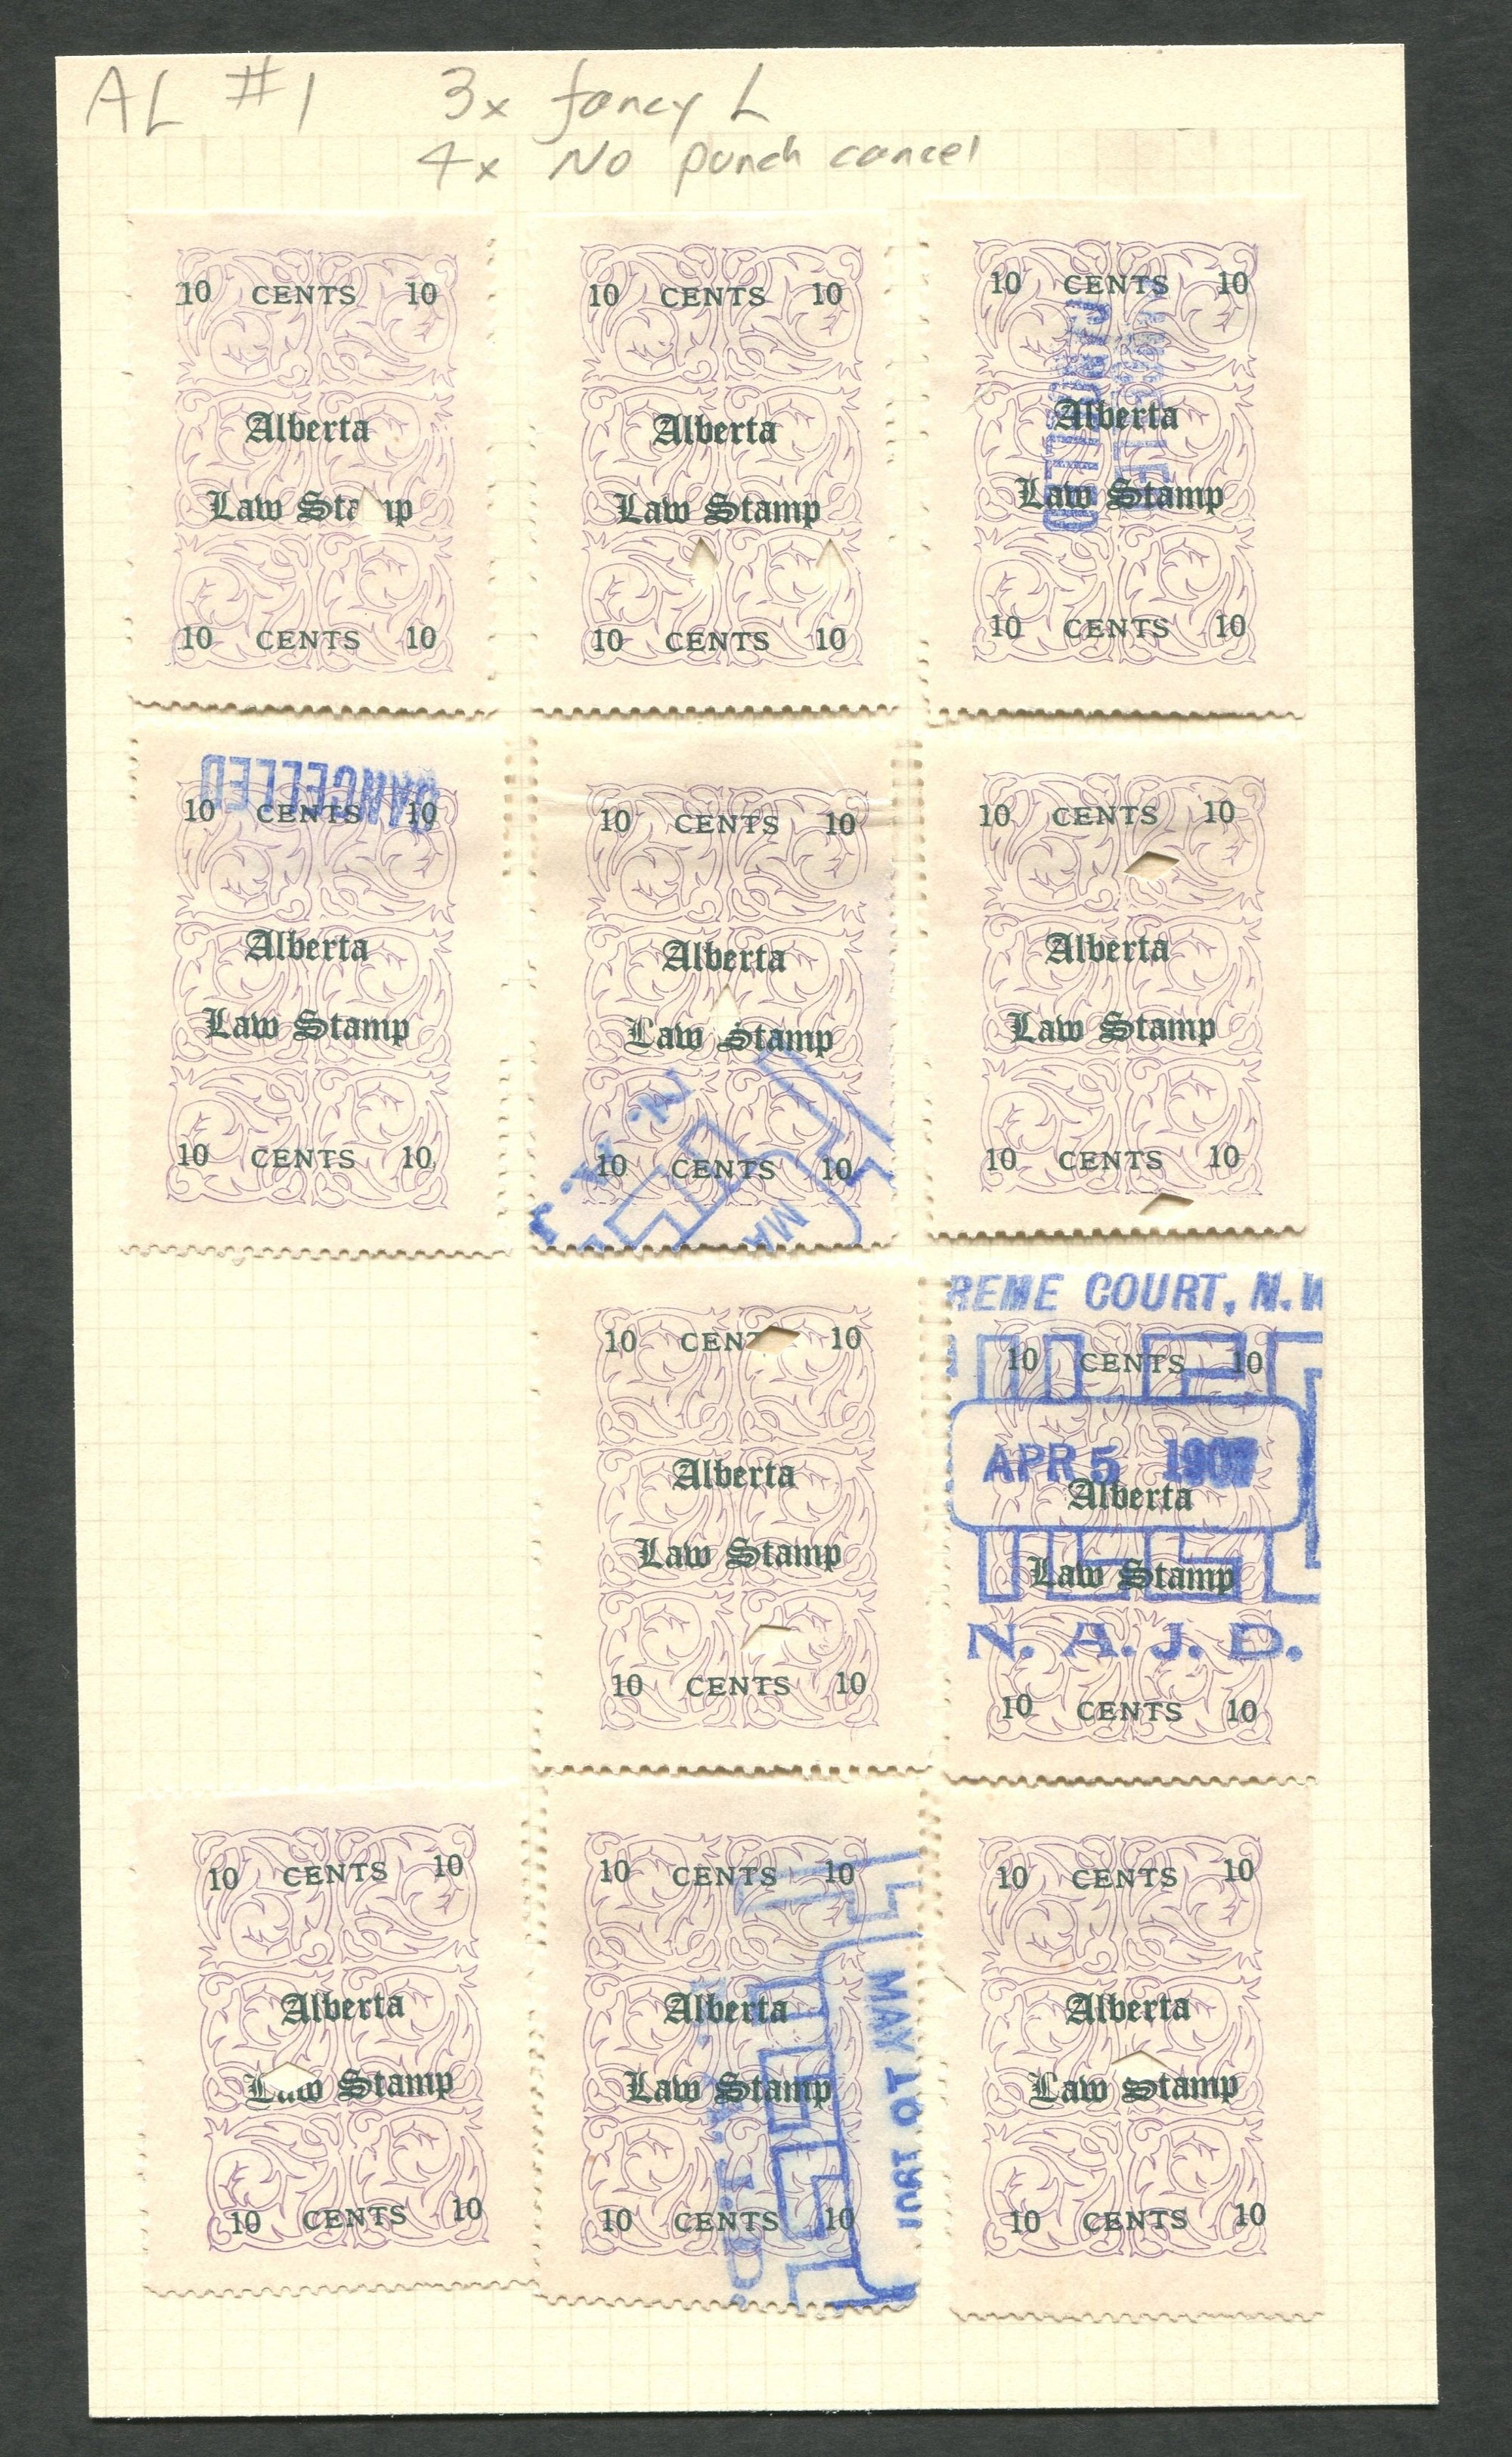 0001AL1709 - AL1 - Used Partially Reconstructed Sheet - Deveney Stamps Ltd. Canadian Stamps